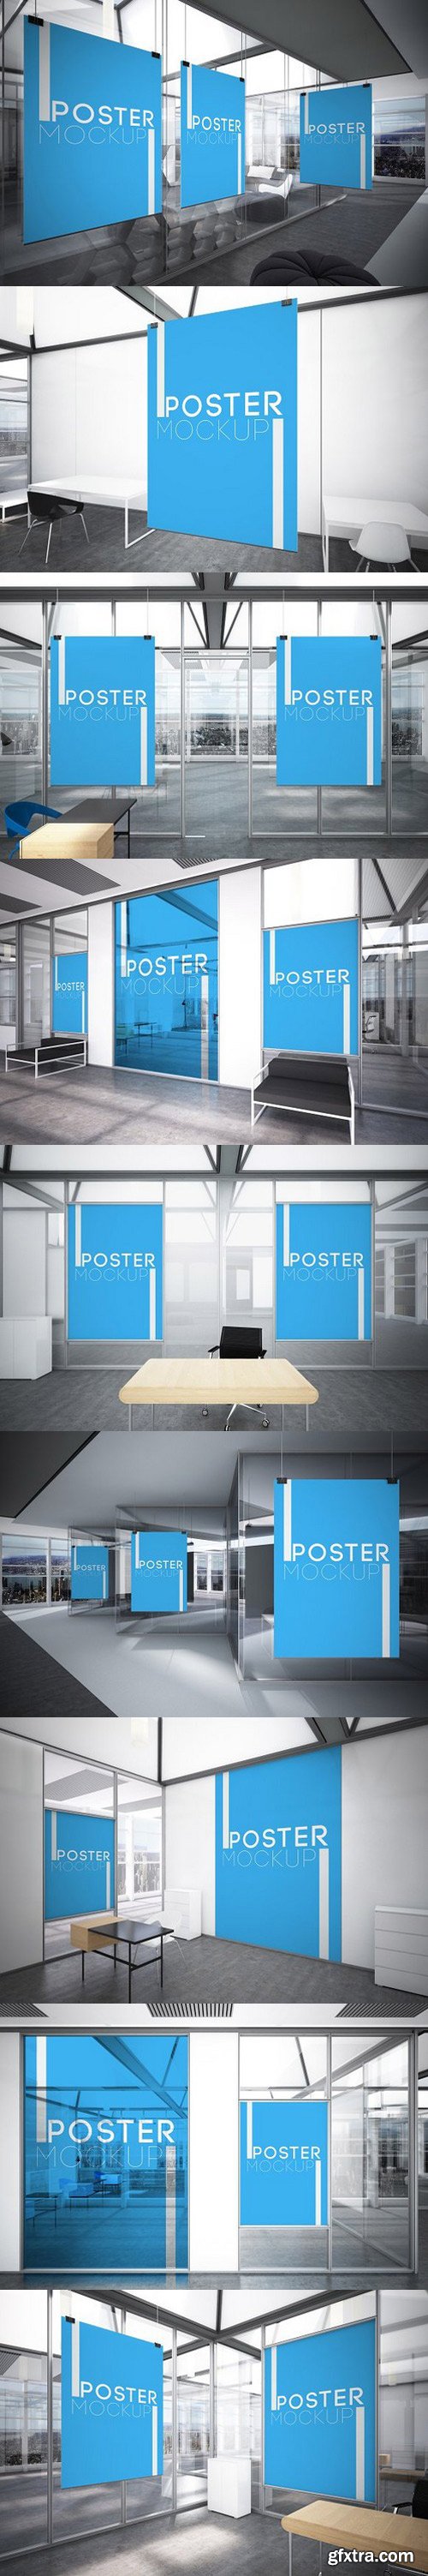 Office Posters Mockups